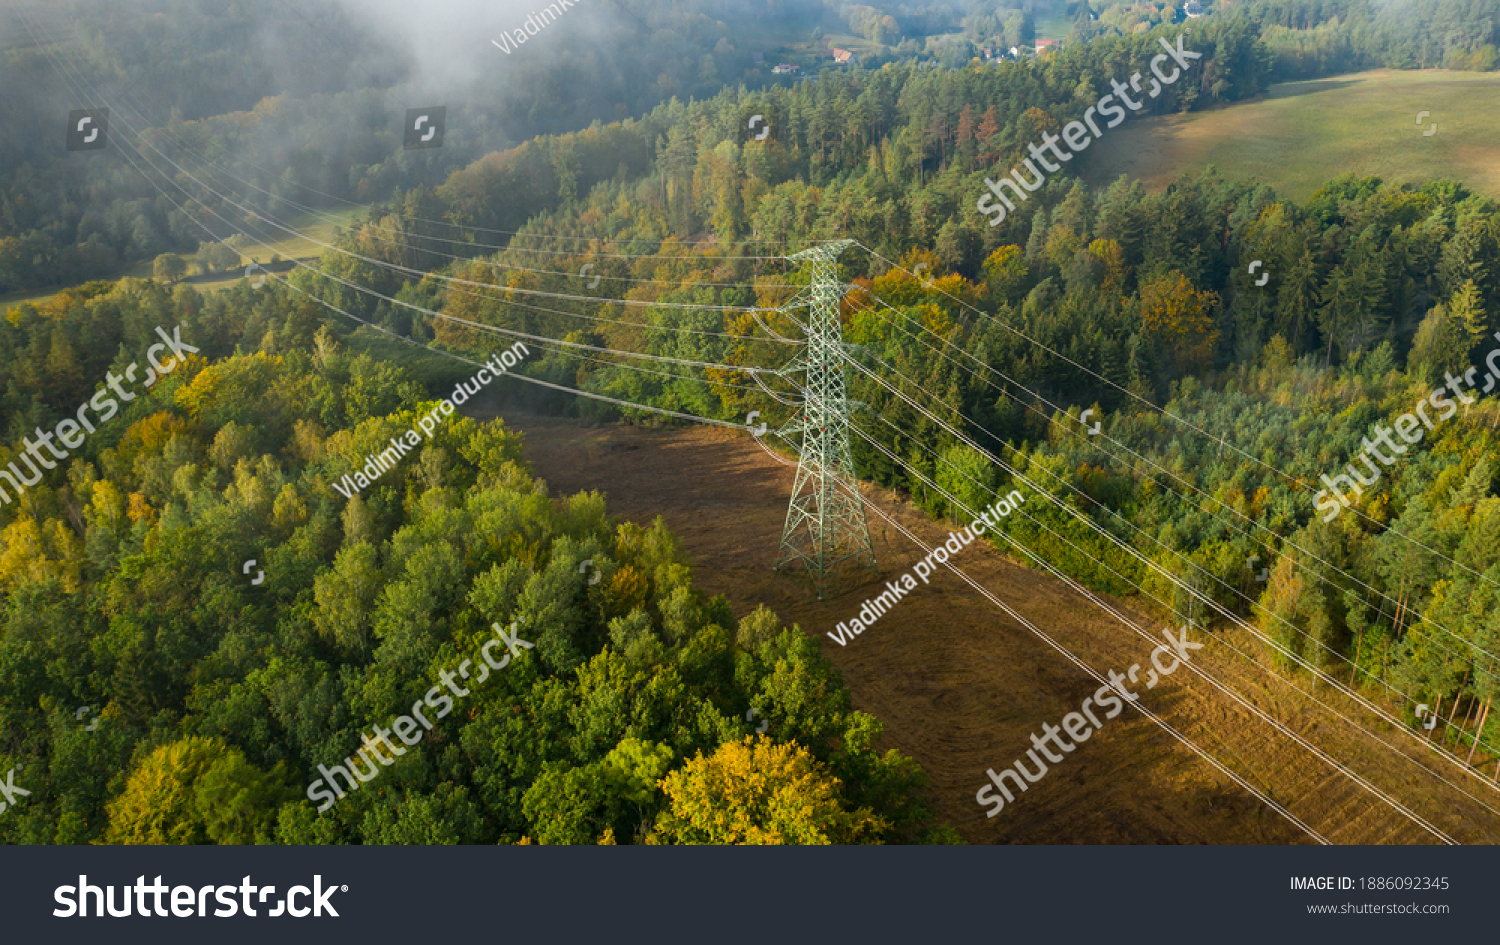 Aerial view of the high voltage power lines and high voltage electric transmission on the terrain surrounded by trees at sunlight #1886092345